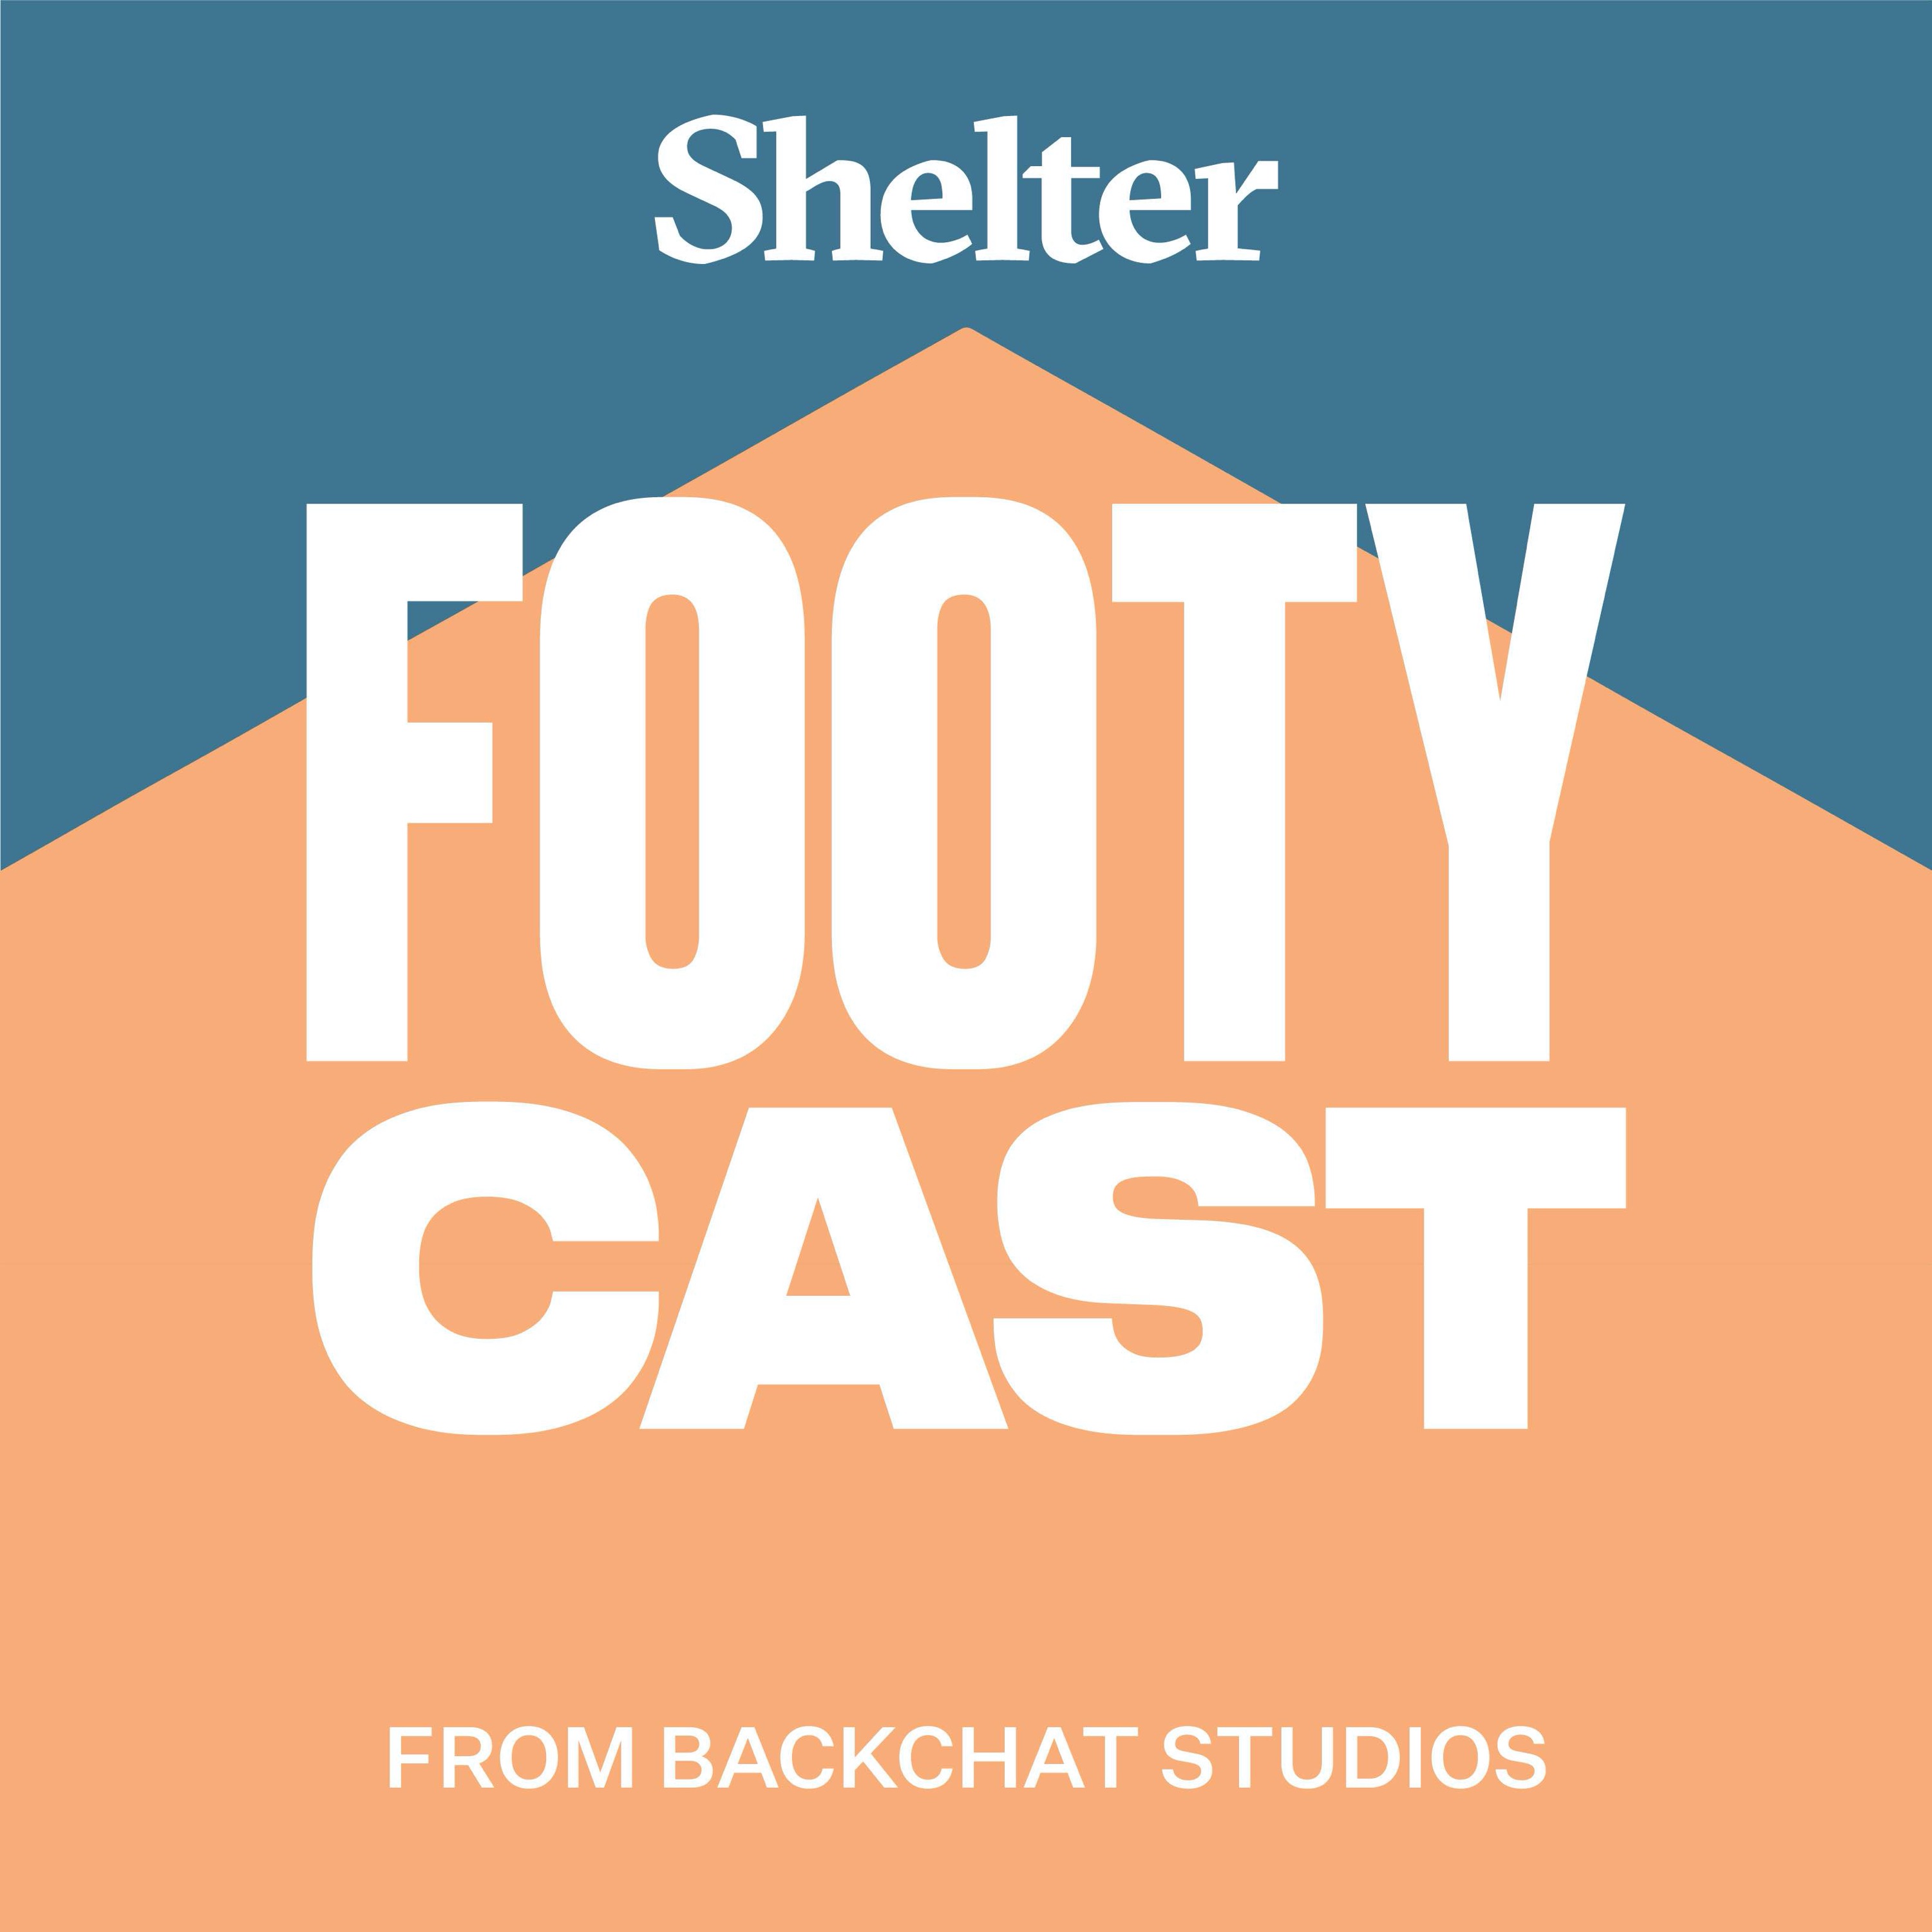 Shelter FootyCast Finals Week 1 REVIEW